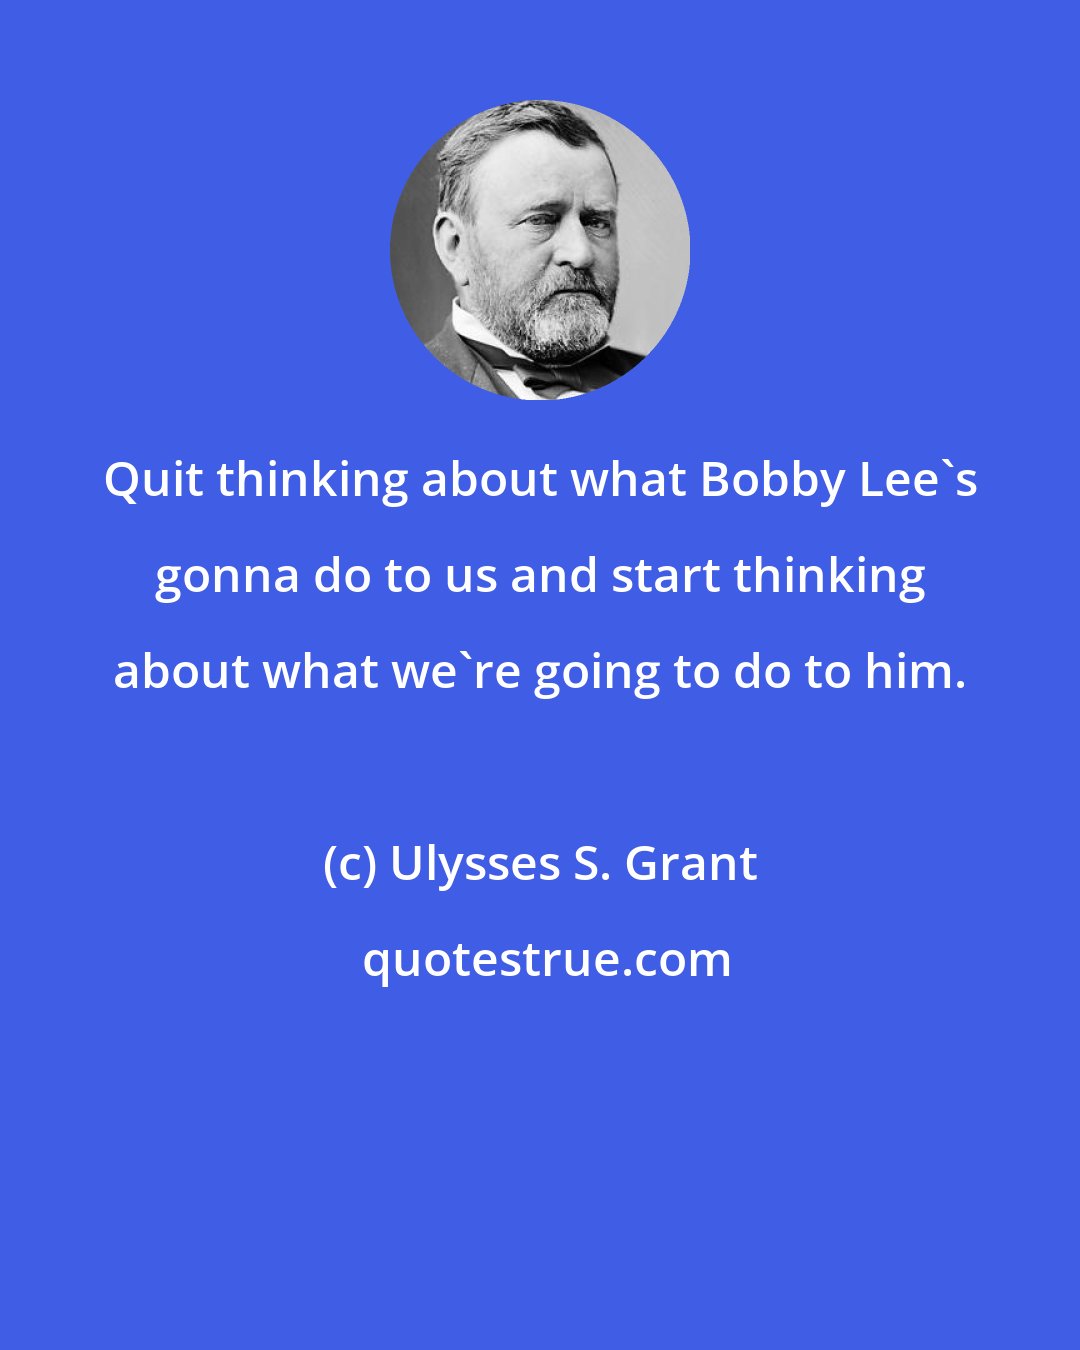 Ulysses S. Grant: Quit thinking about what Bobby Lee's gonna do to us and start thinking about what we're going to do to him.